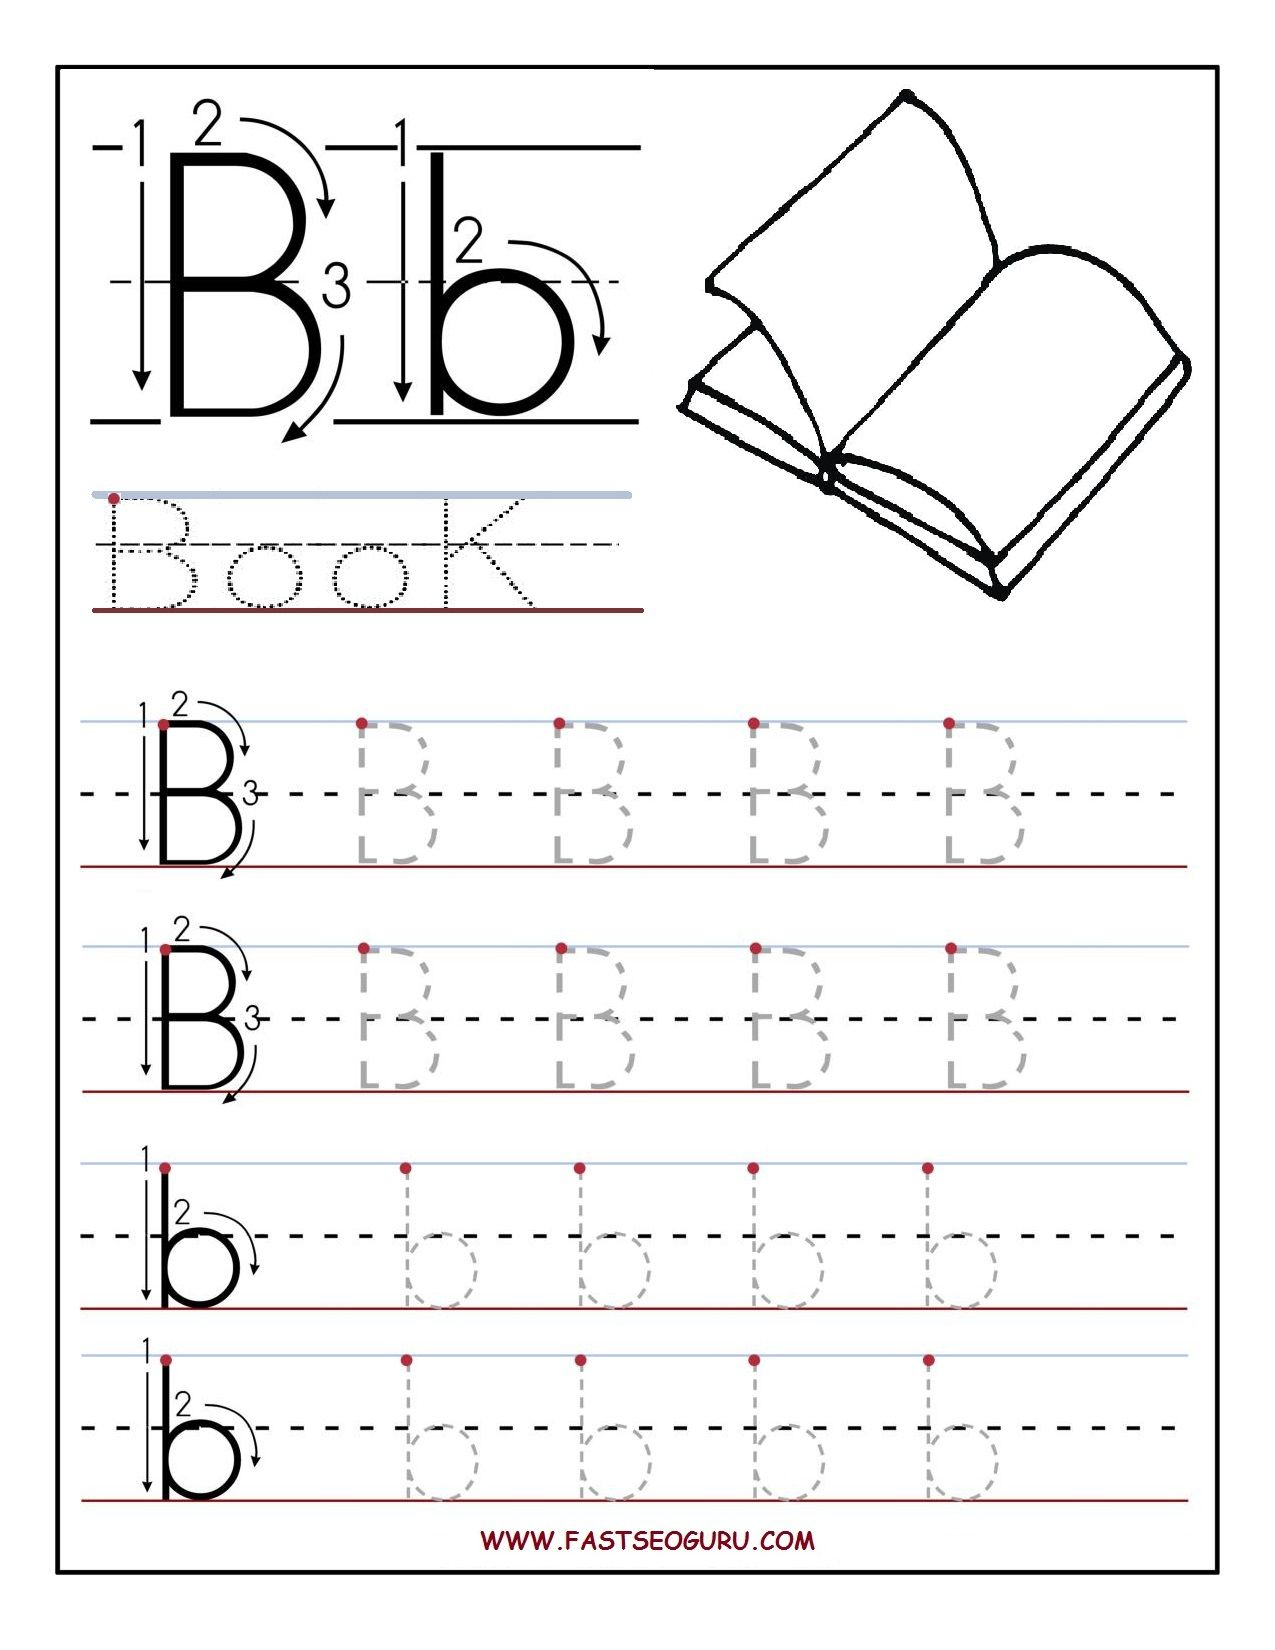 Printable Letter B Tracing Worksheets For Preschool throughout Letter B Worksheets For Preschool